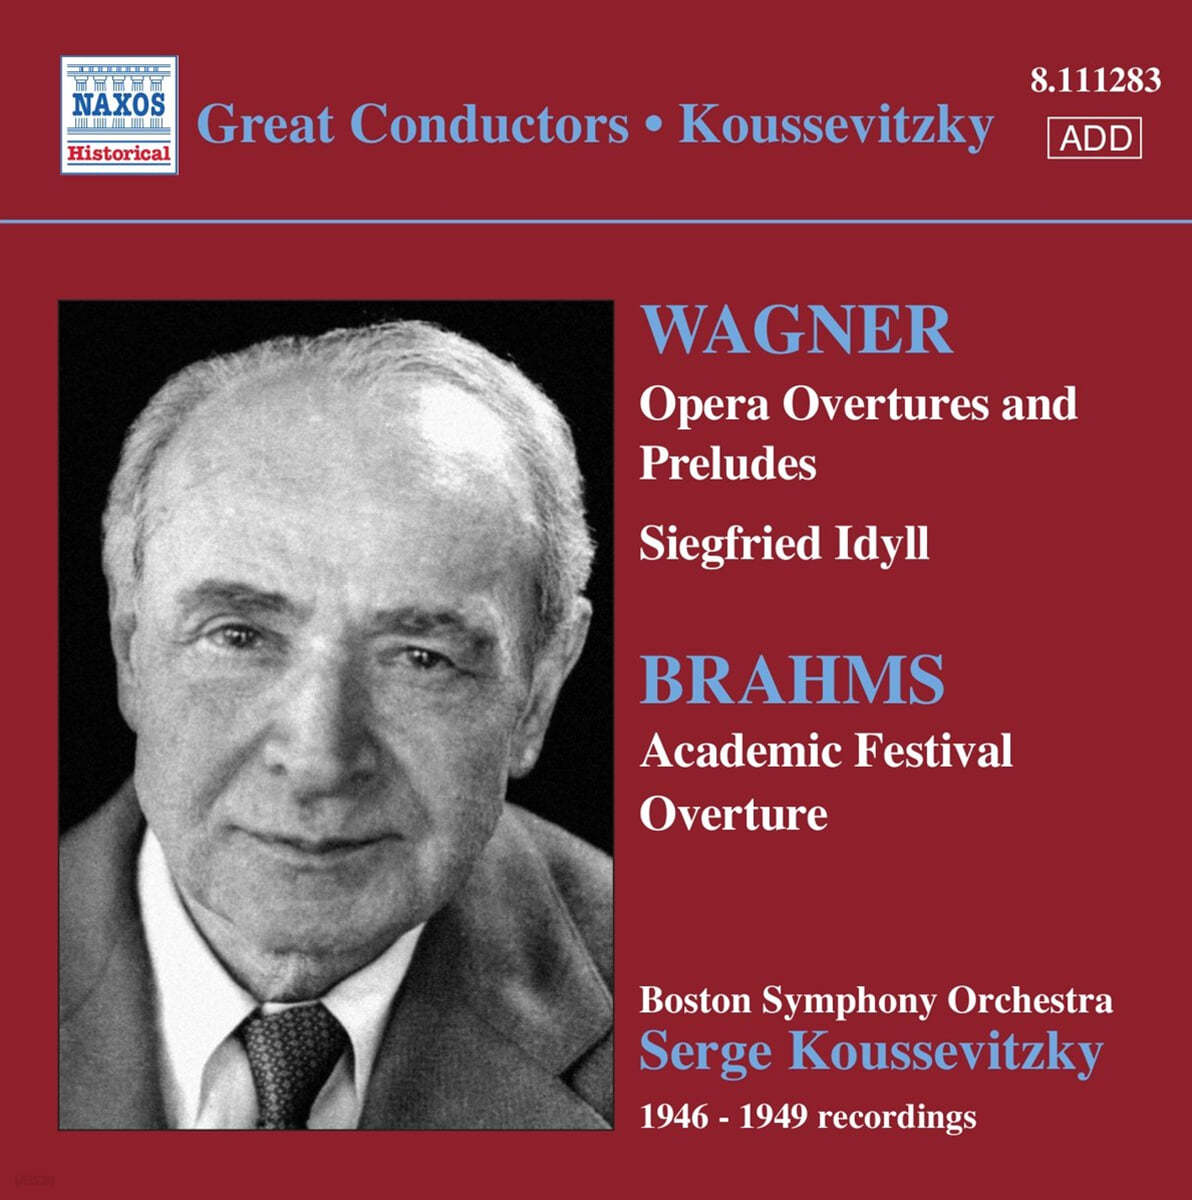 Serge Koussevitzky 바그너: 관현악 하이라이트 / 브람스: 대학축전서곡 (Wagner: Opera Overtures and Preludes / Brahms: Academic Festival Overture) 